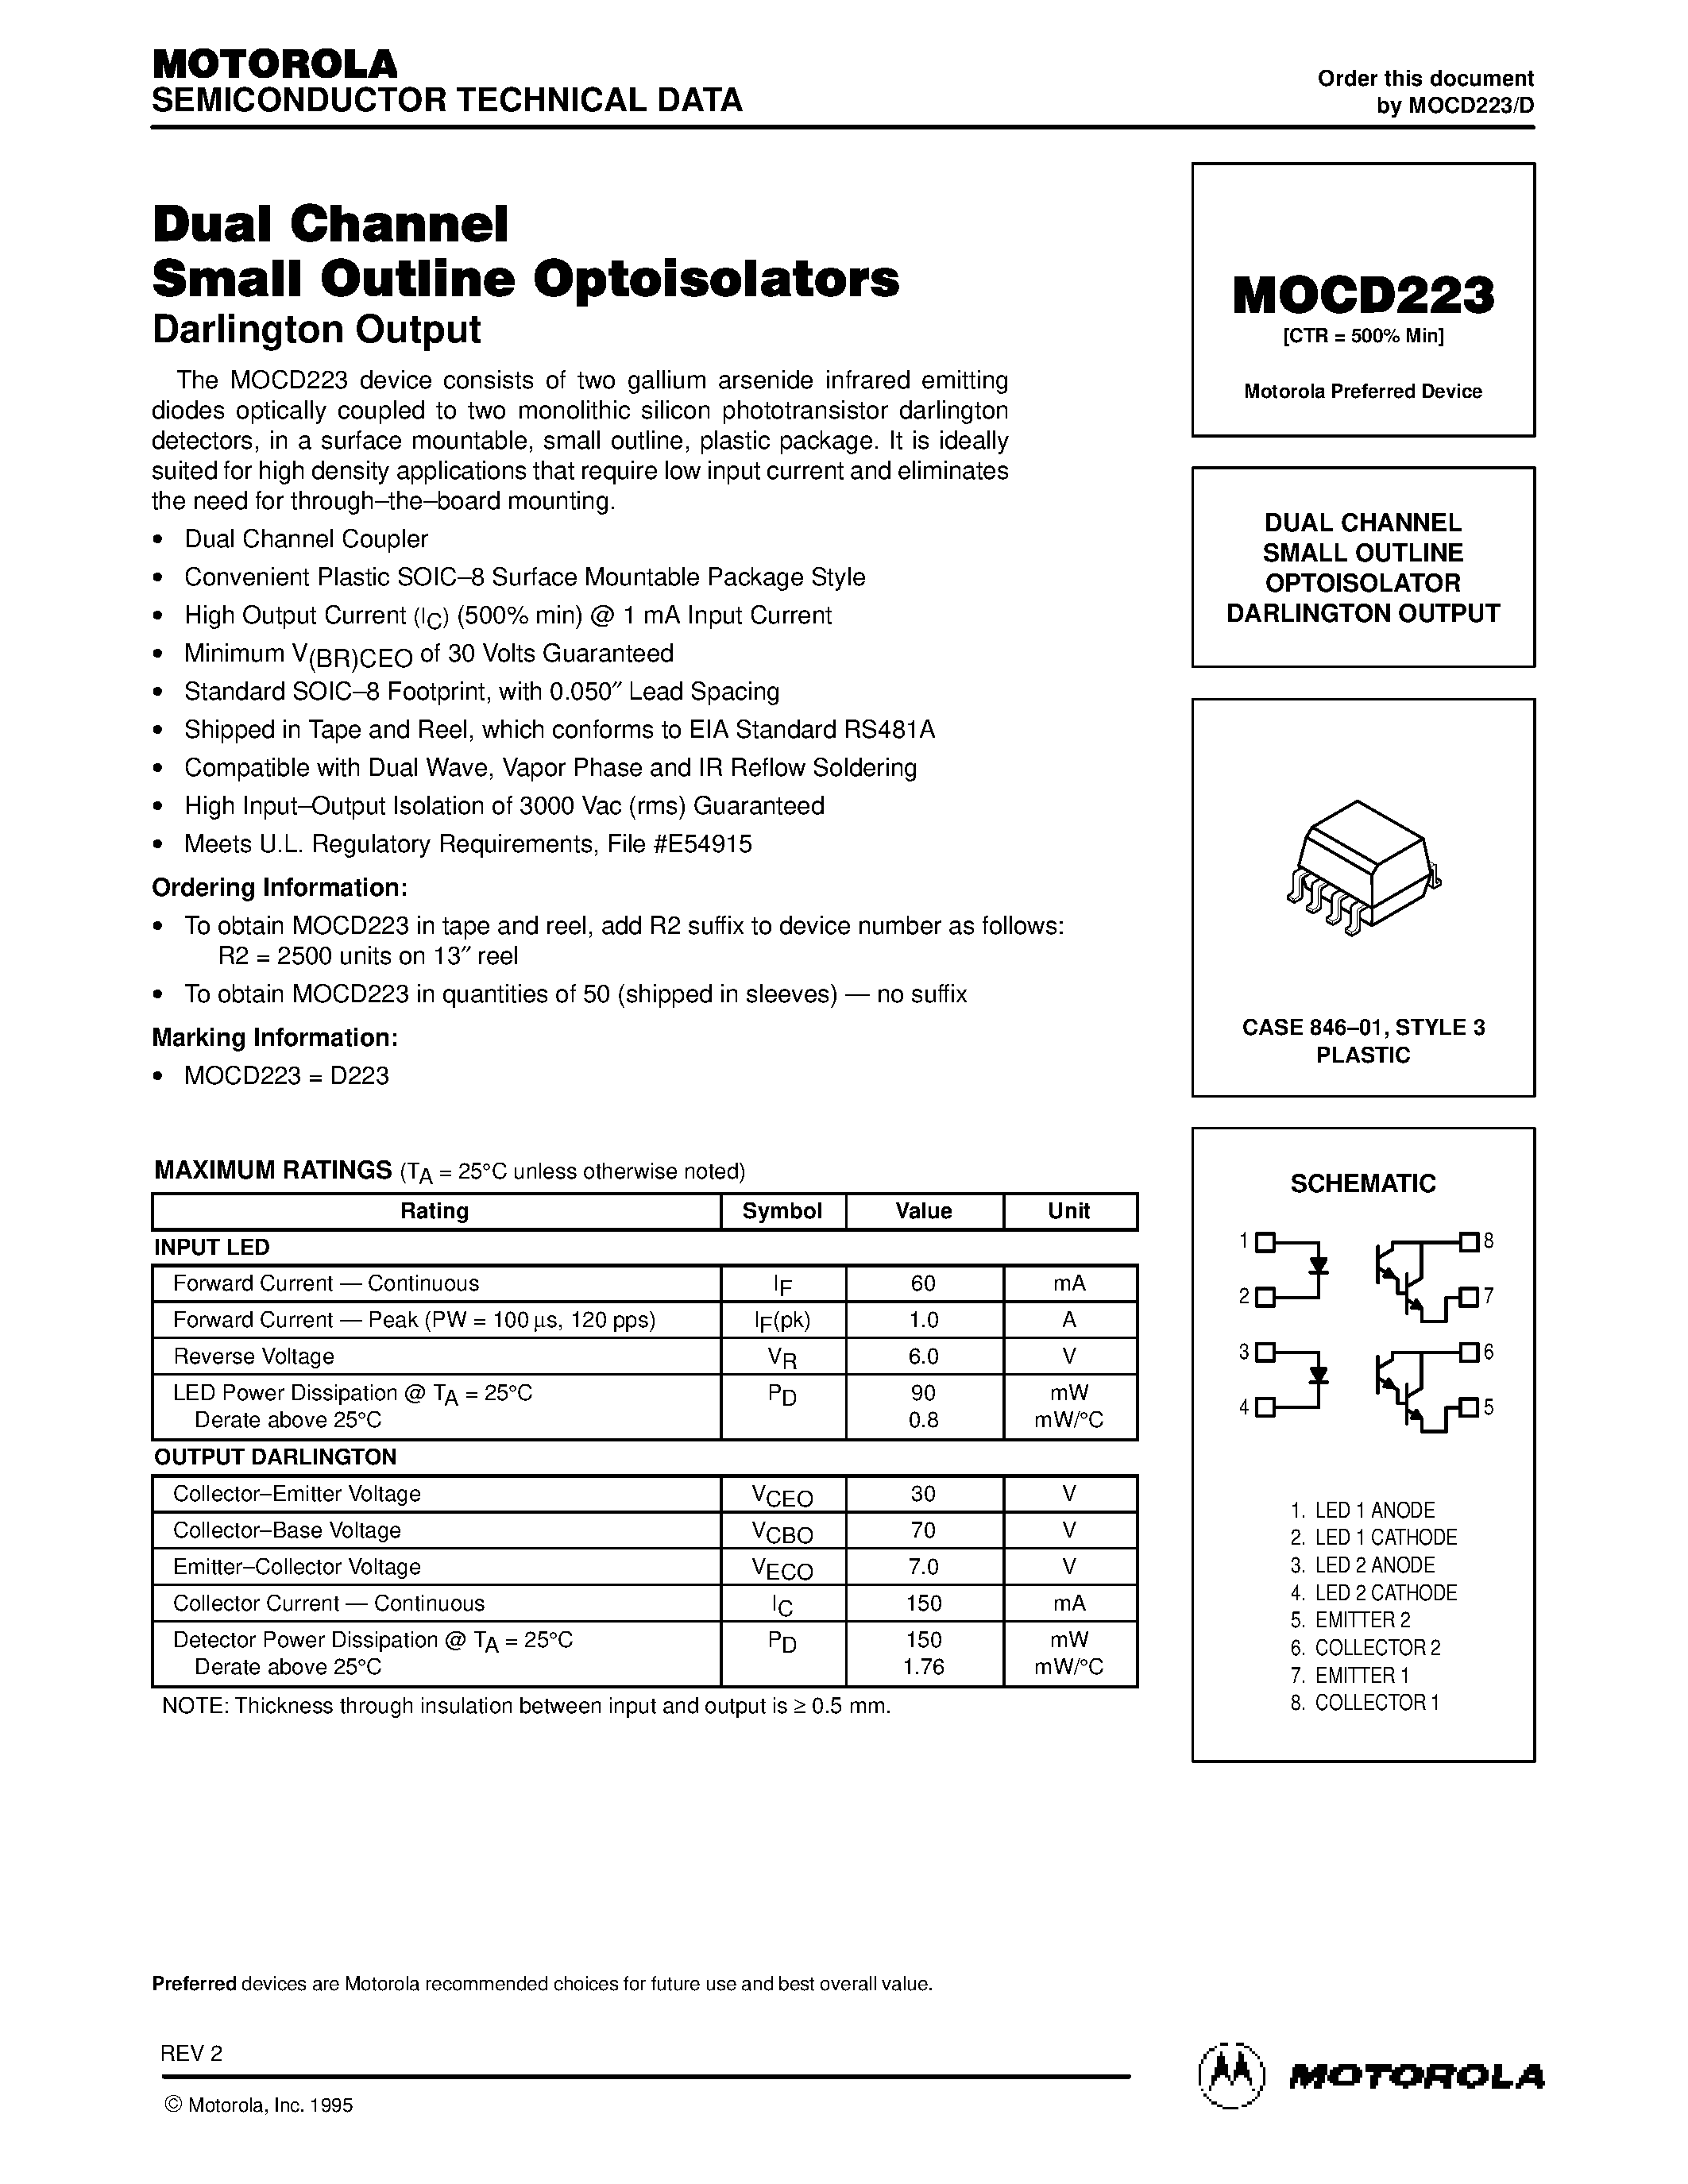 Даташит MOCD223 - DUAL CHANNEL SMALL OUTLINE OPTOISOLATOR DARLINGTON OUTPUT страница 1